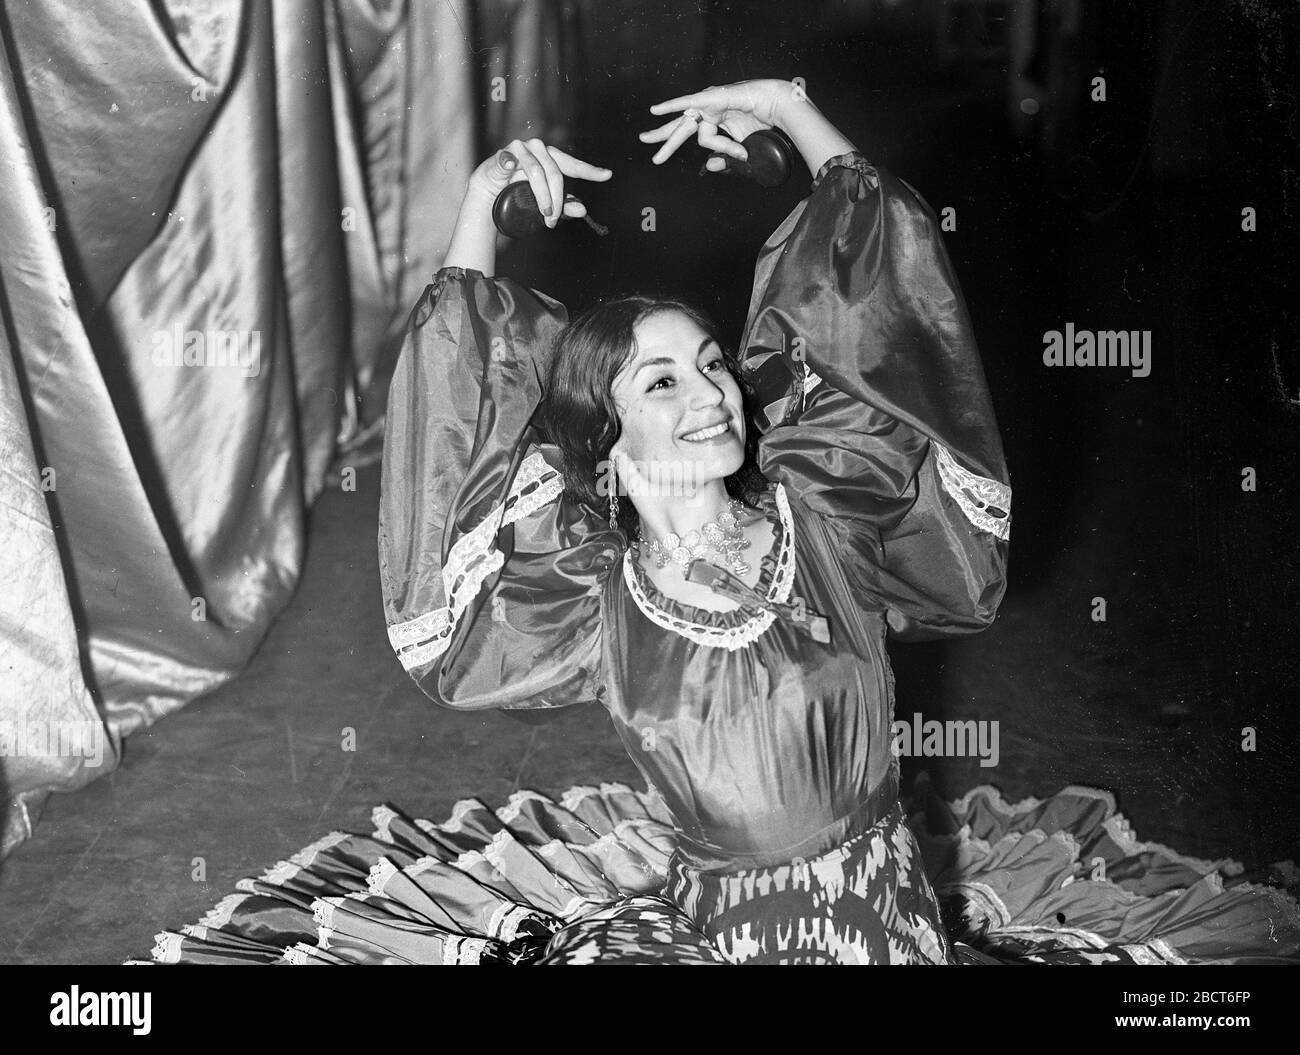 Actress Gianna Maria Canale in flamenco dress London, October 17th 1957 Stock Photo